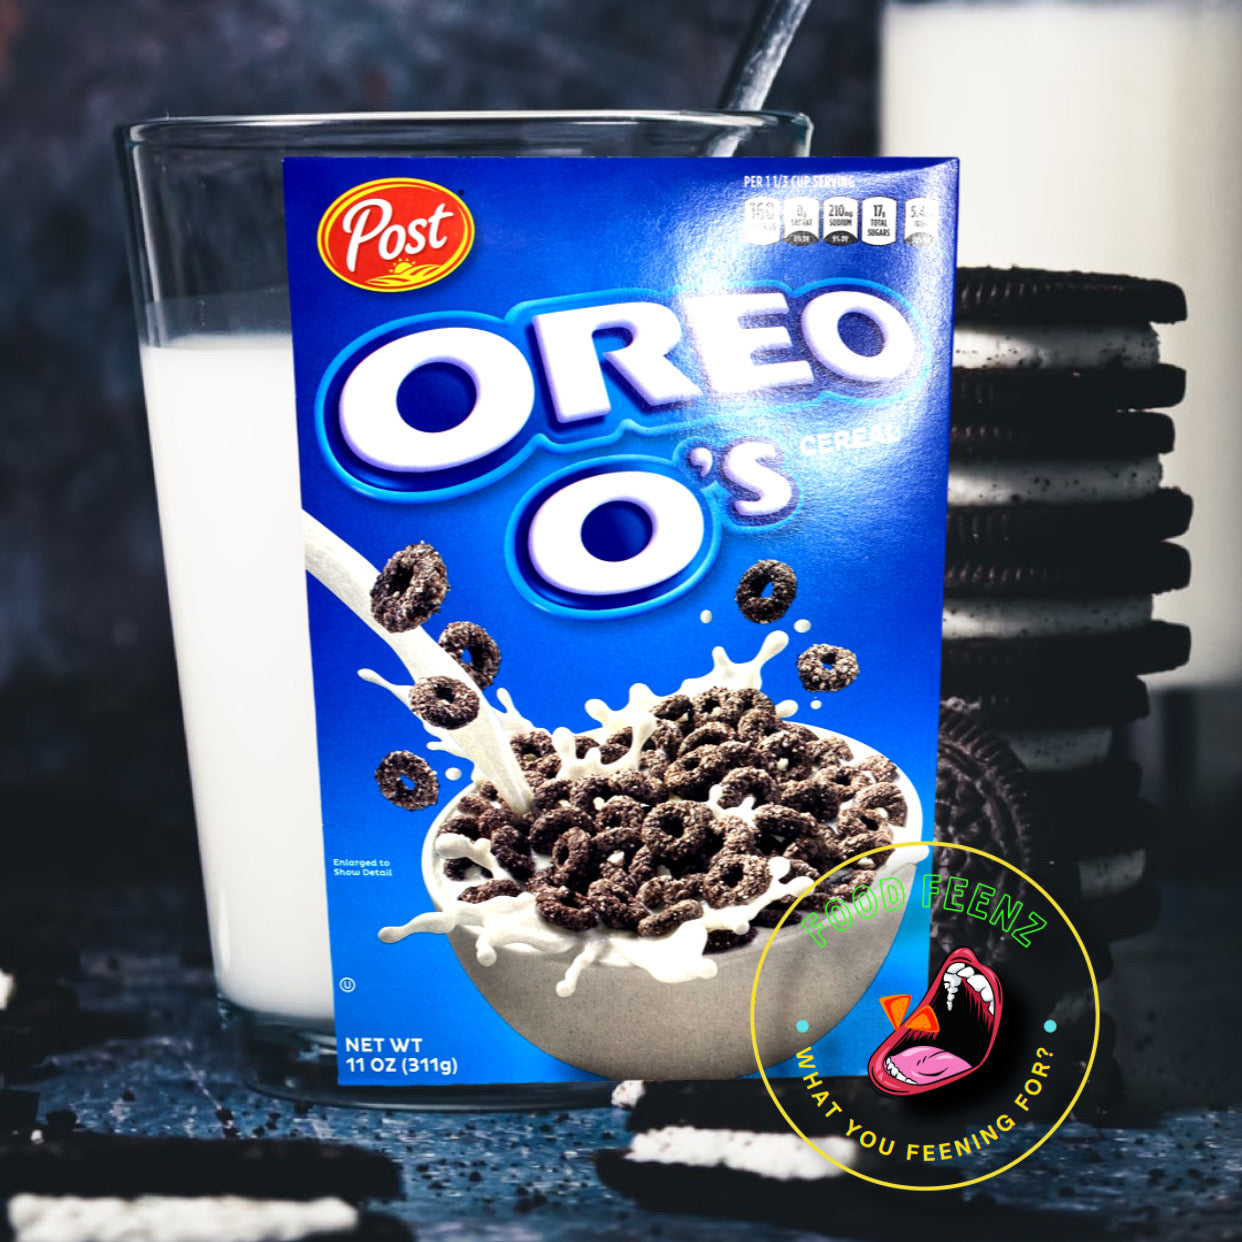 Oreo's Cereal